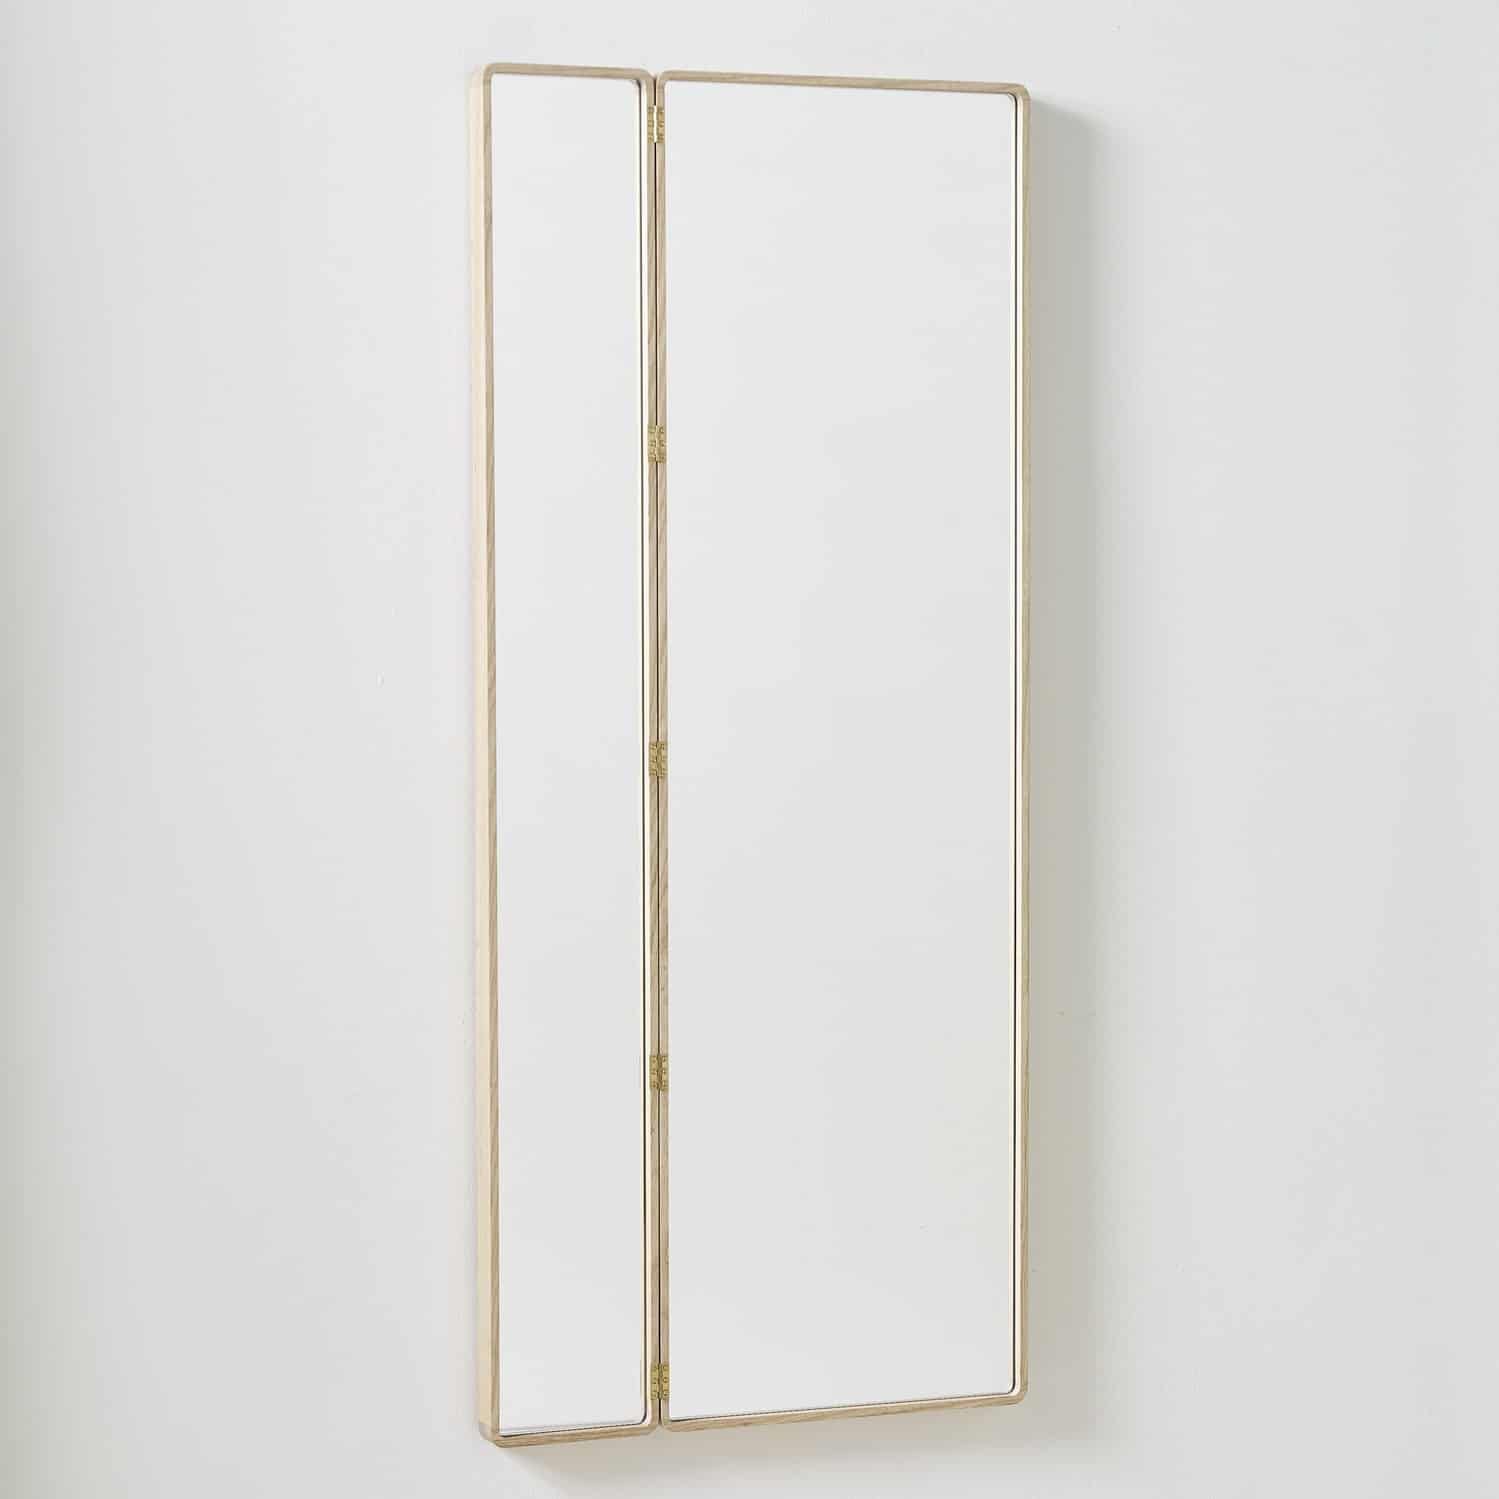 Ori Wall Mirror | Another Country | Mirror, Mirror Wall, Hallway Mirror Pertaining To Eriq Framed Wall Mirrors (View 6 of 15)